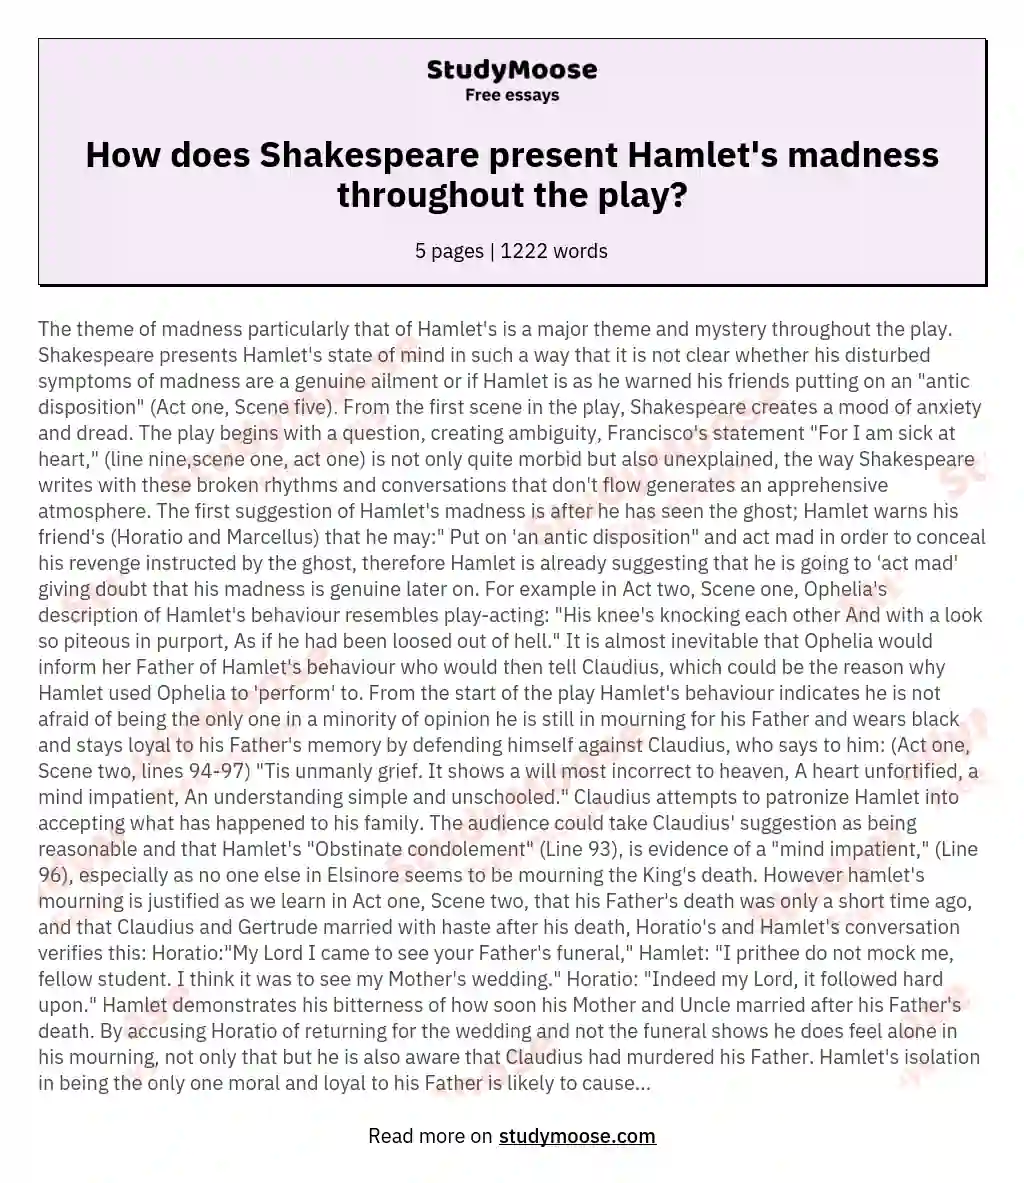 hamlet theme of madness thesis